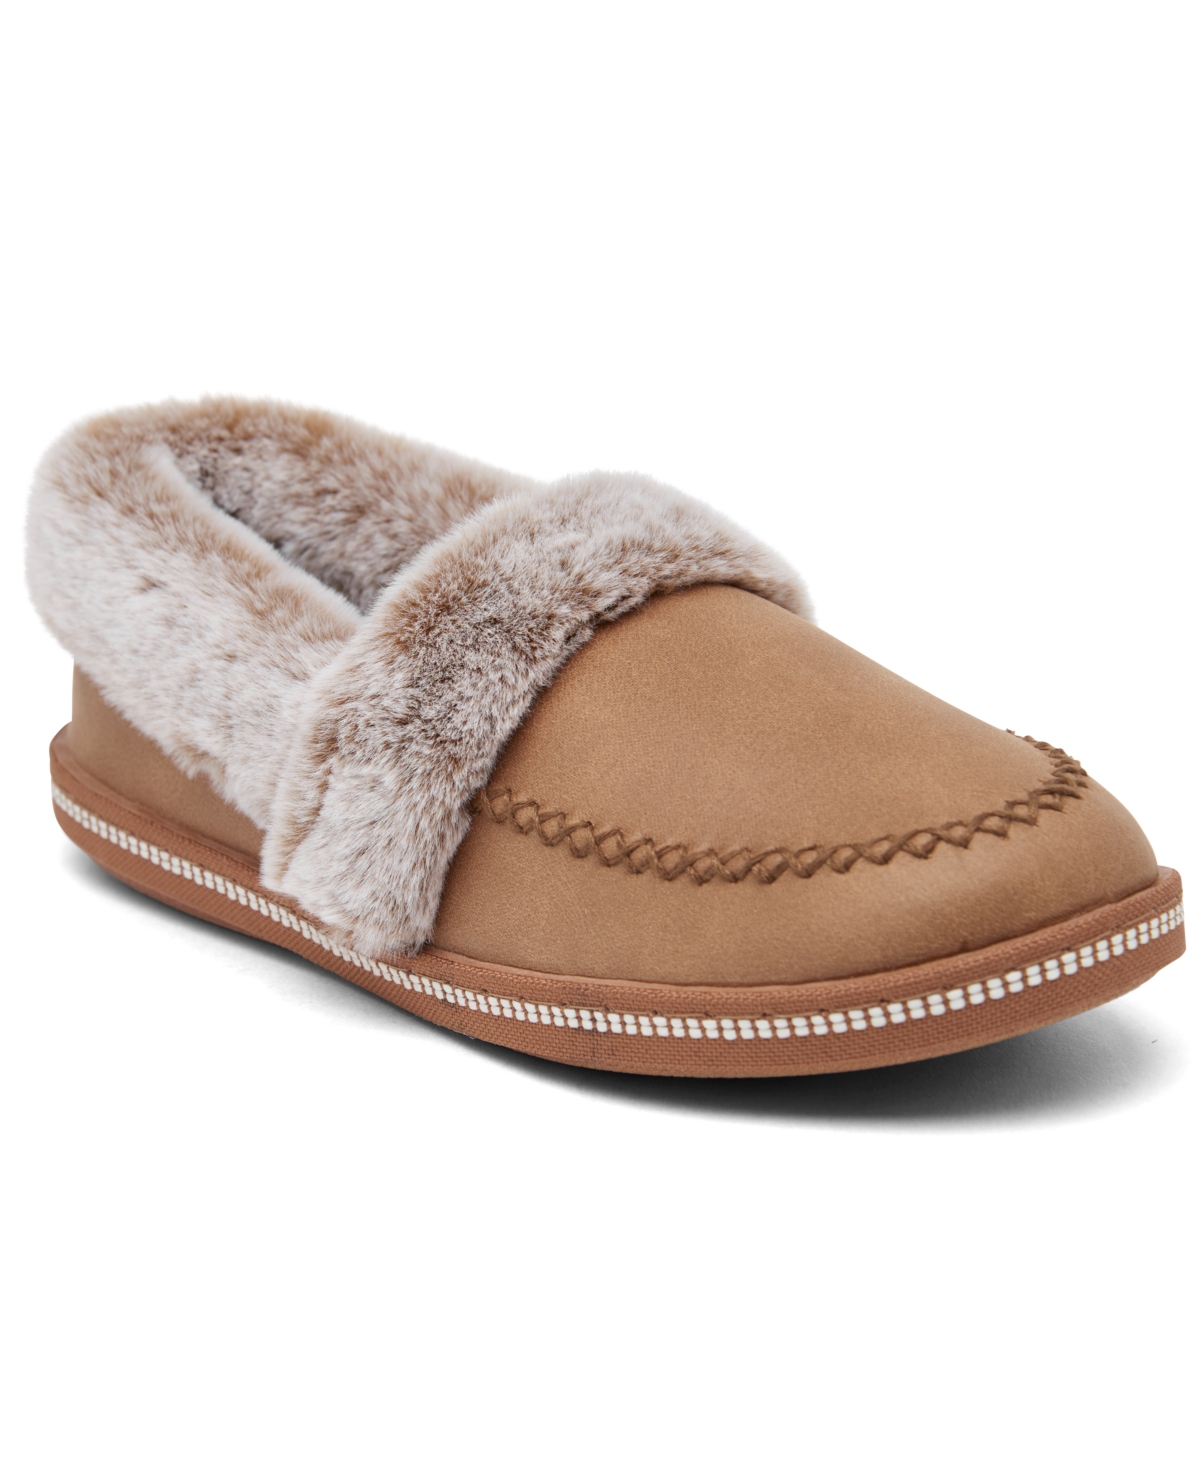 Women's Cozy Campfire - Let's Toast Indoor and Outdoor Slippers from Finish Line - Chestnut